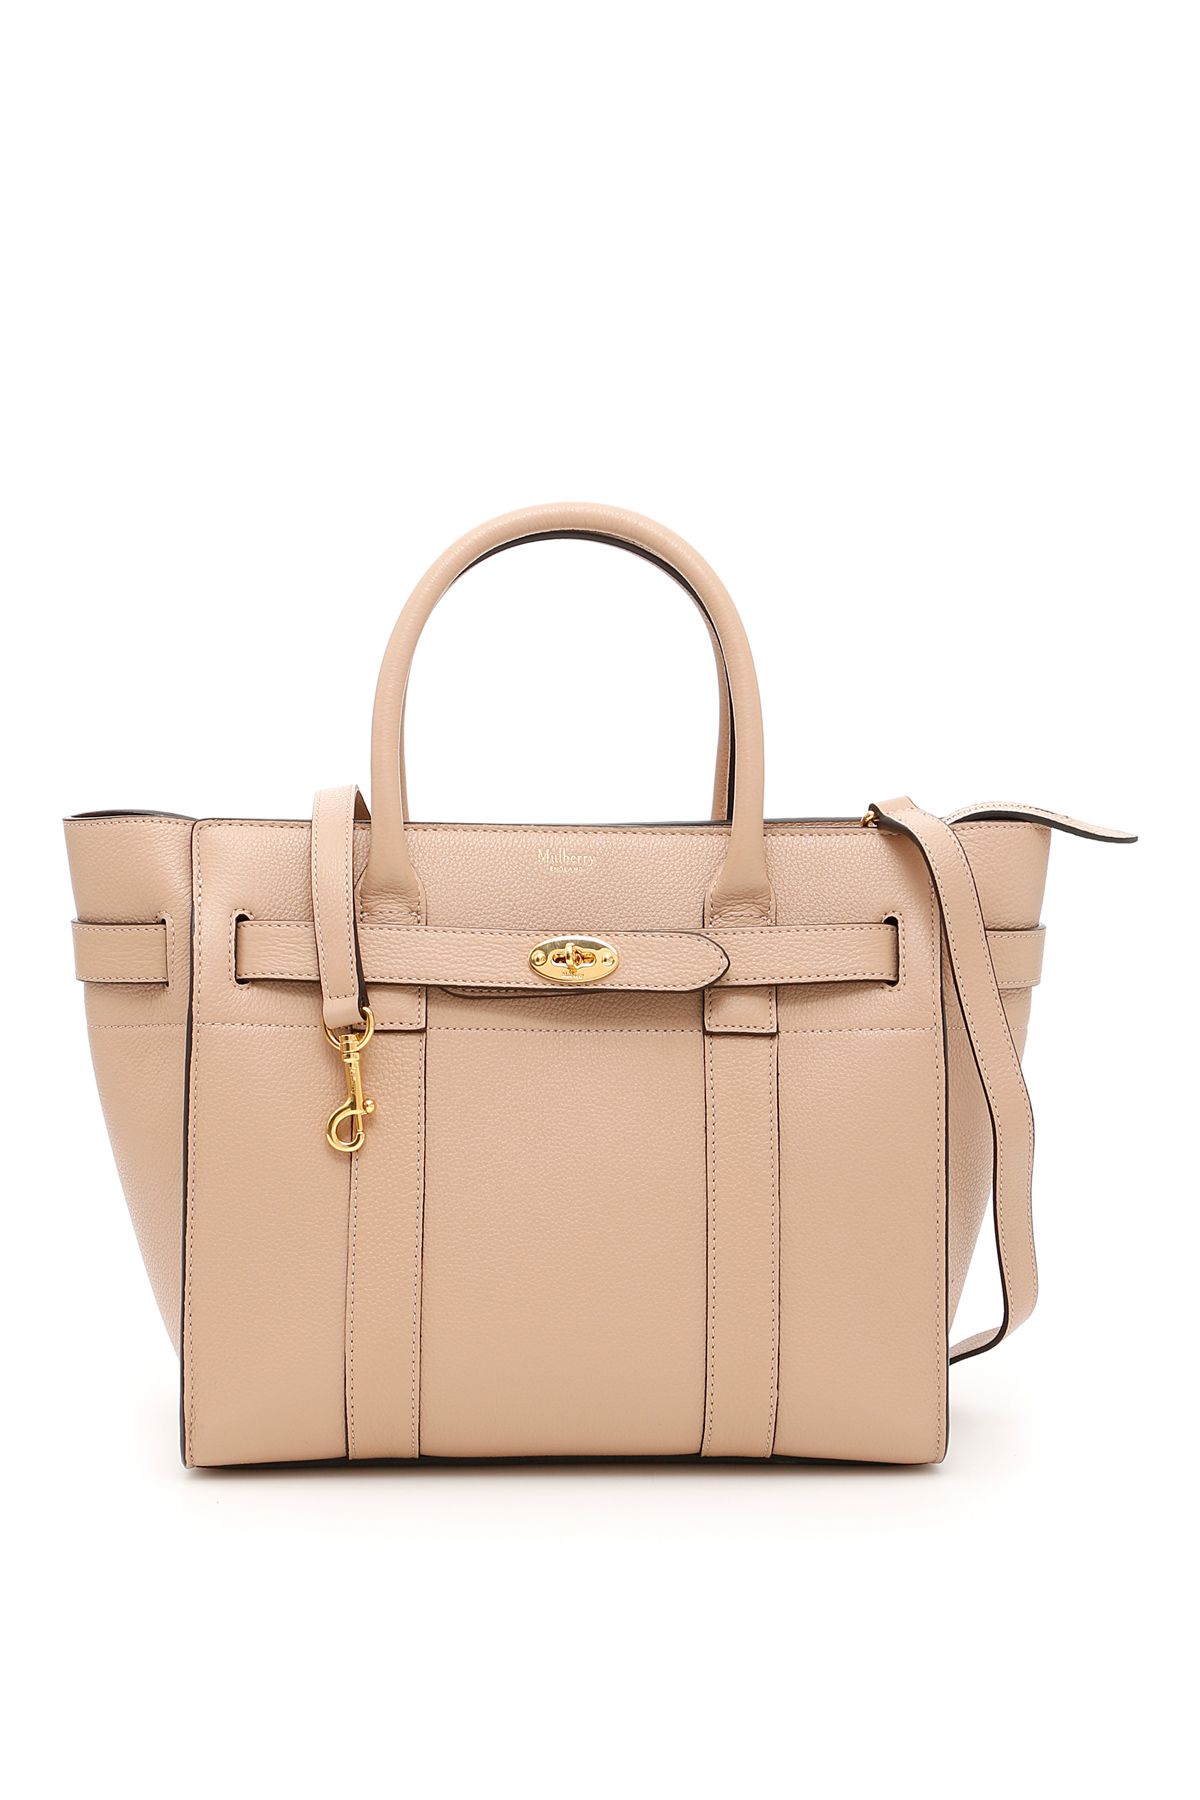 Mulberry ZIPPED BAYSWATER SMALL BAG